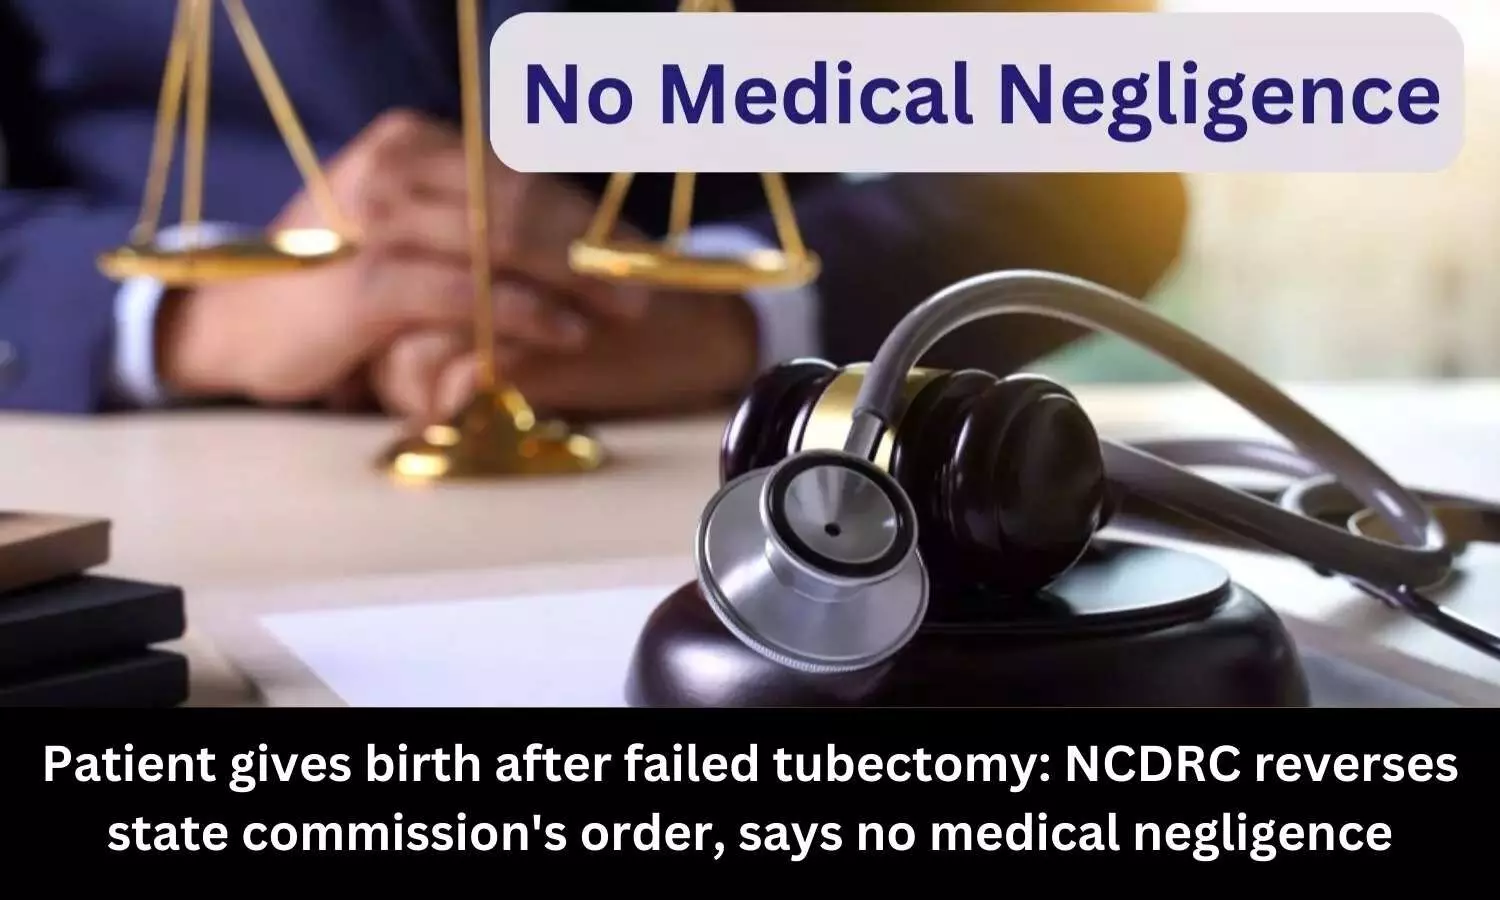 Patient gives birth after failed tubectomy: NCDRC reverses state commissions order, says no medical negligence